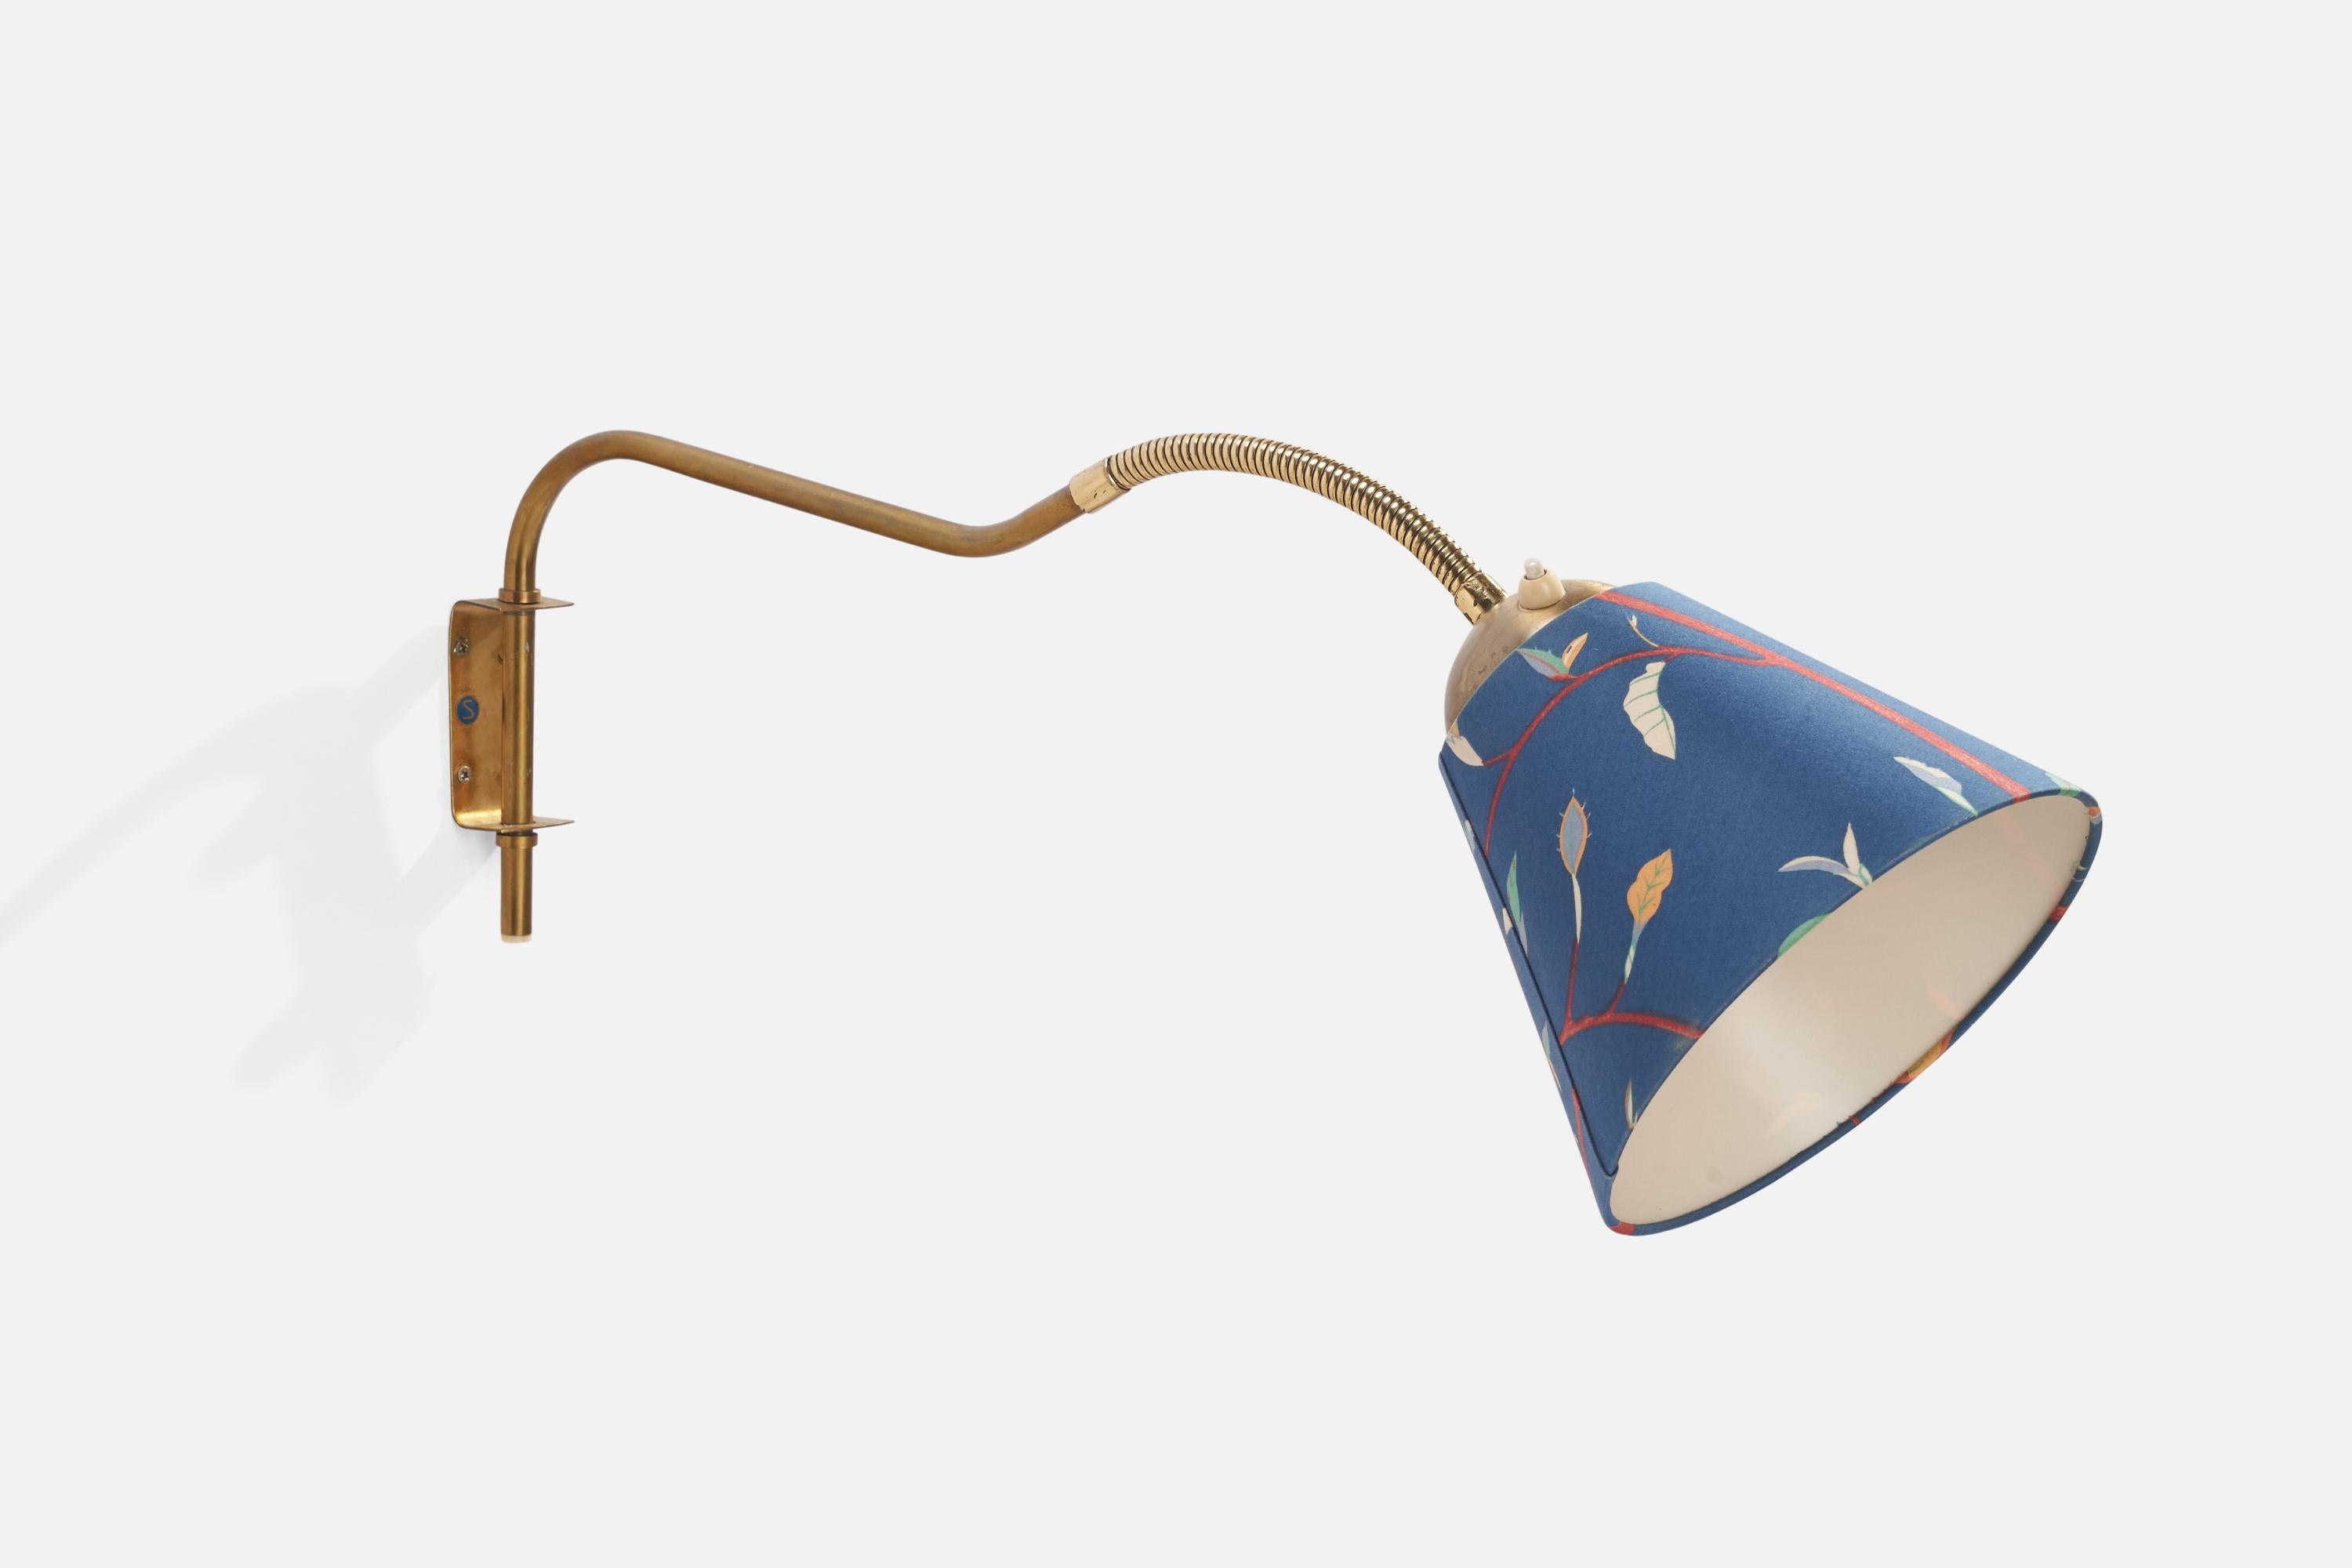 A brass and fabric wall light designed and produced in Sweden, 1940s.

Lamp configured for plug in with cord feeding visibly from bottom of stem.
Overall Dimensions (inches): 8.5” H x 17” W x 25”  D
Back Plate Dimensions (inches): 3.5”  H x 1.5” W x